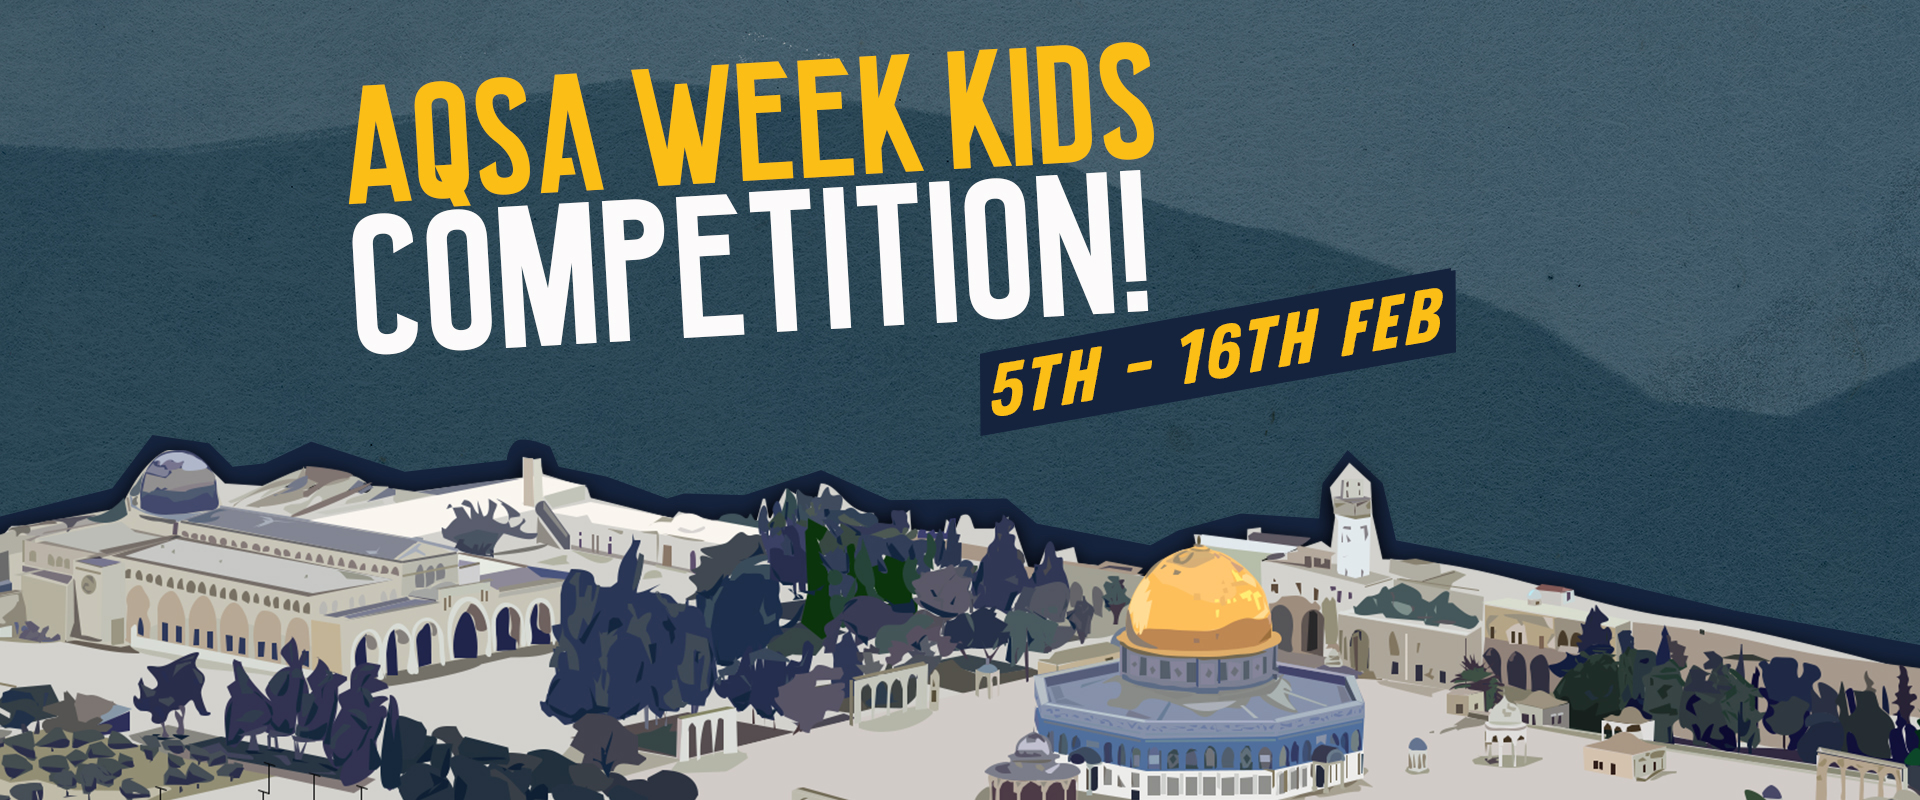 Aqsa Week Kids Competition